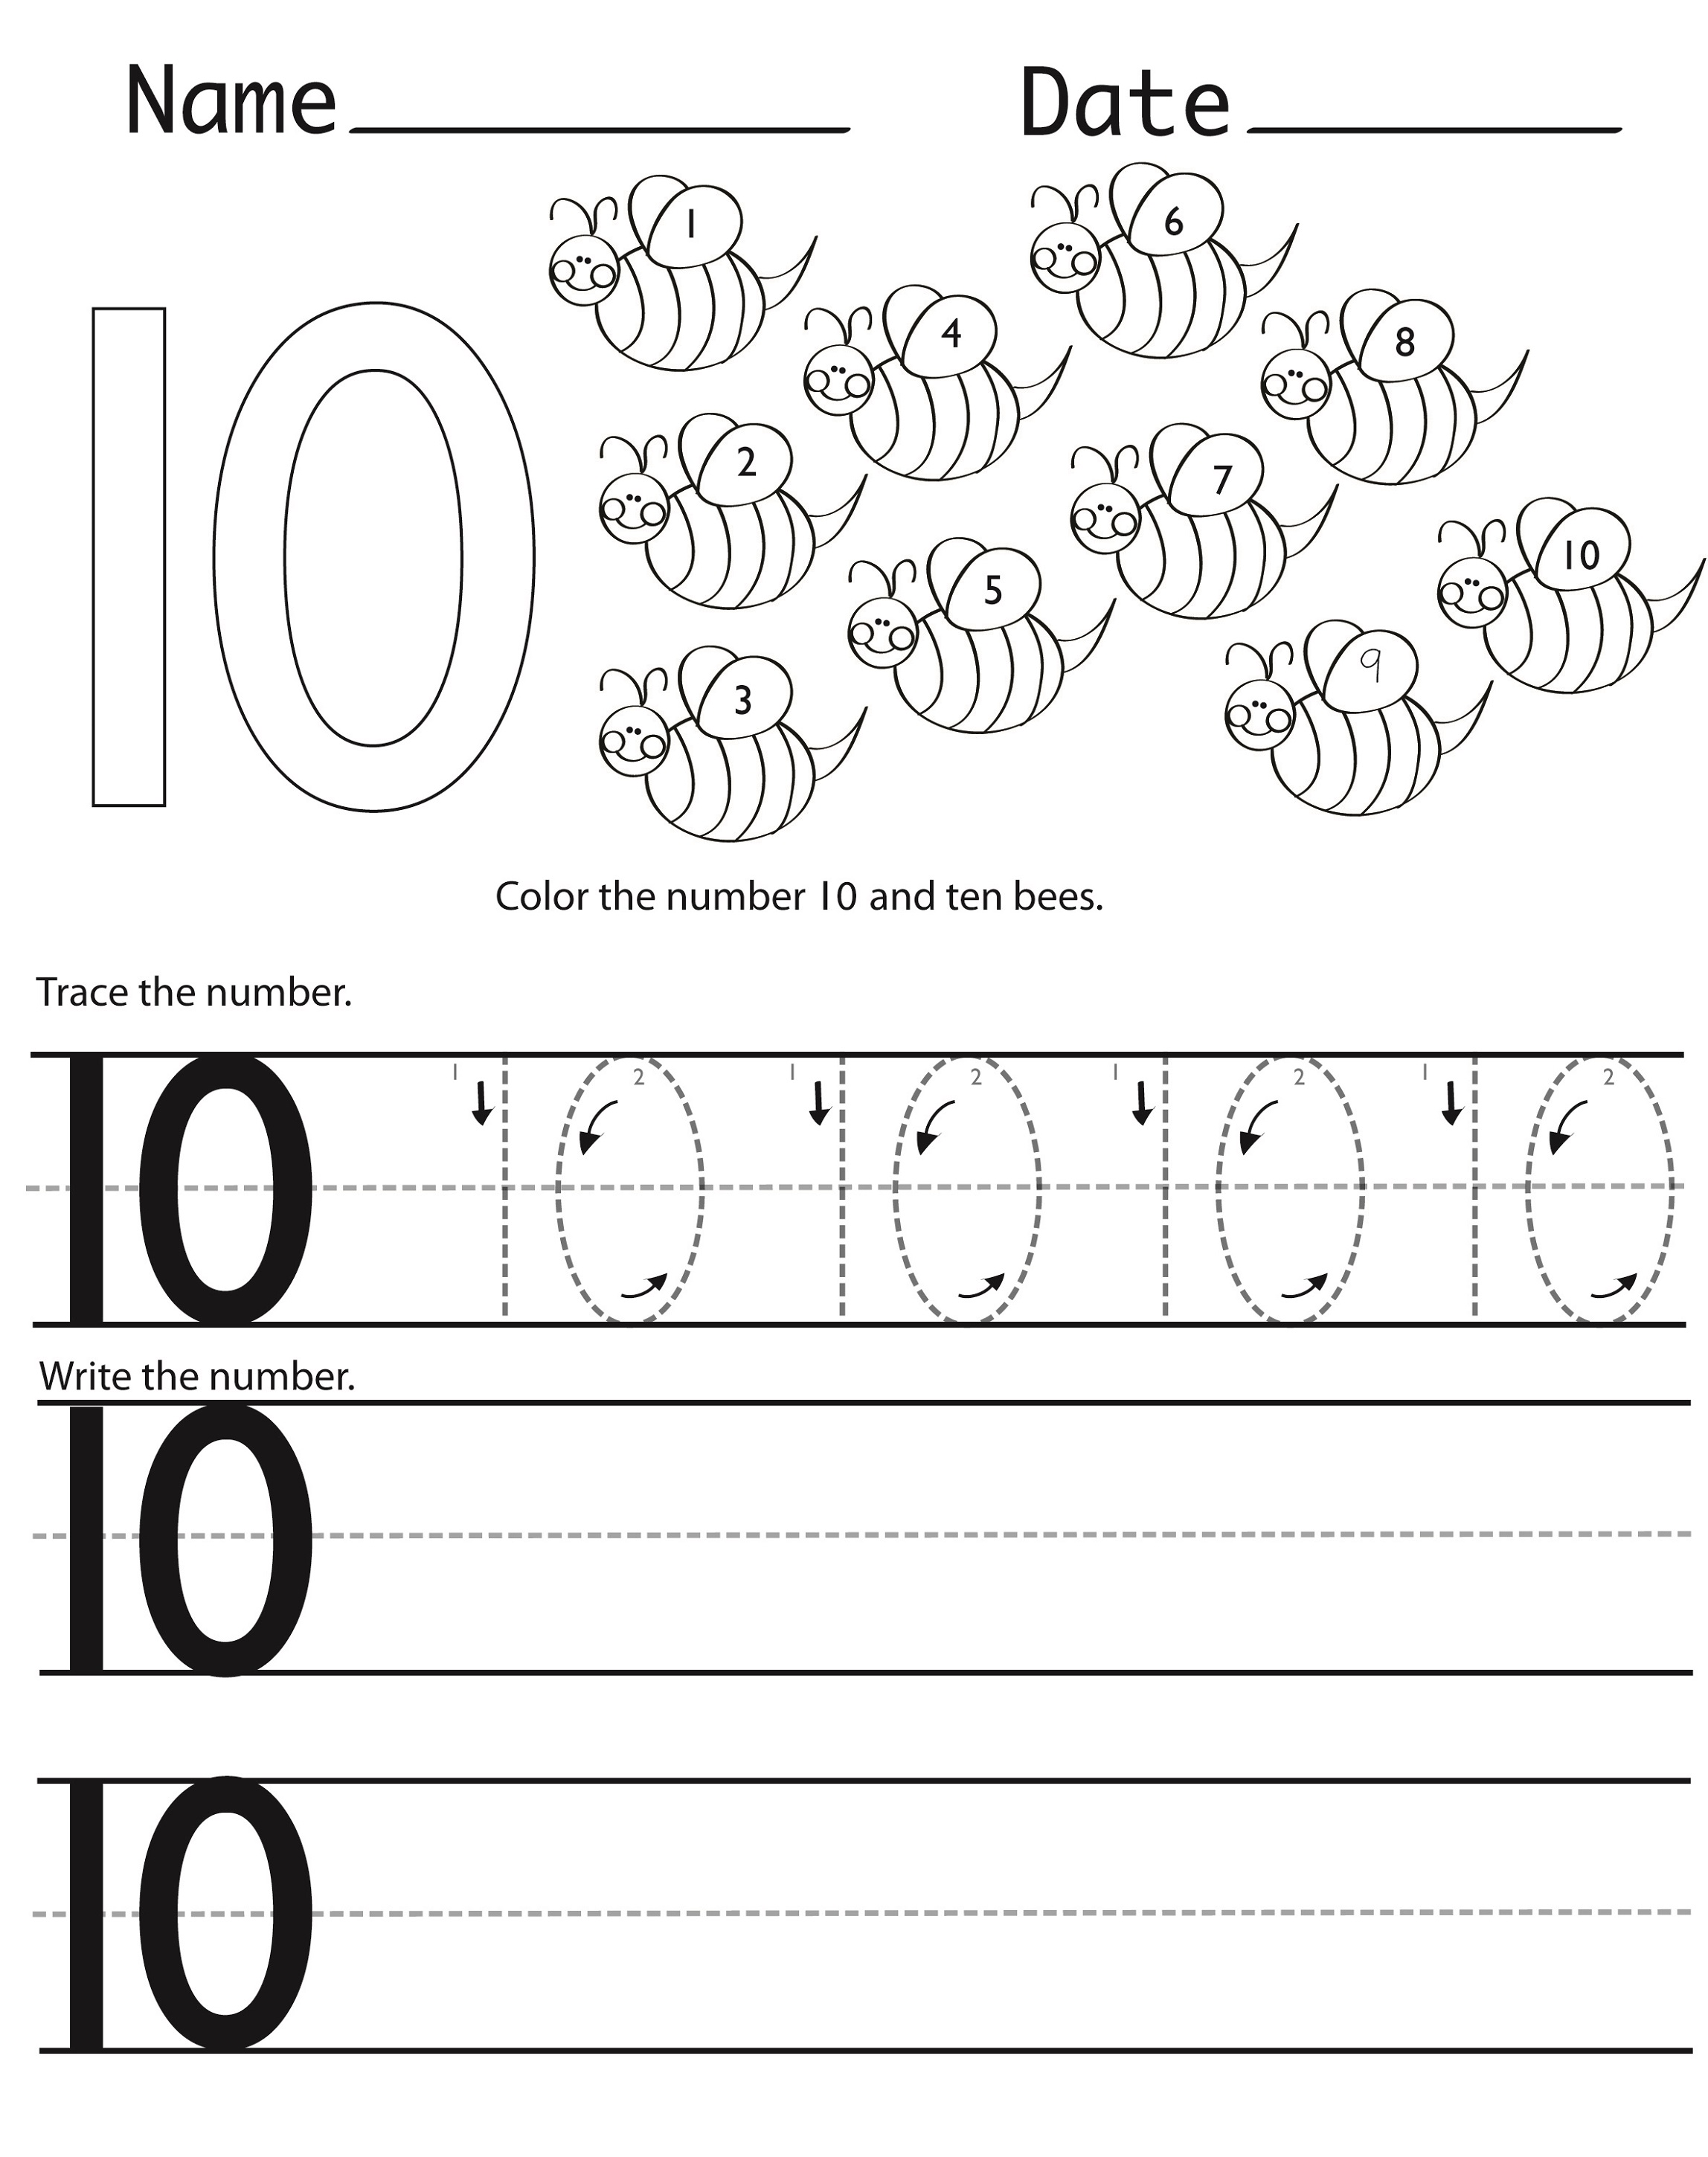 Writing One To Ten Writing Numbers 1 10 In Words Worksheets Let s Get Started With